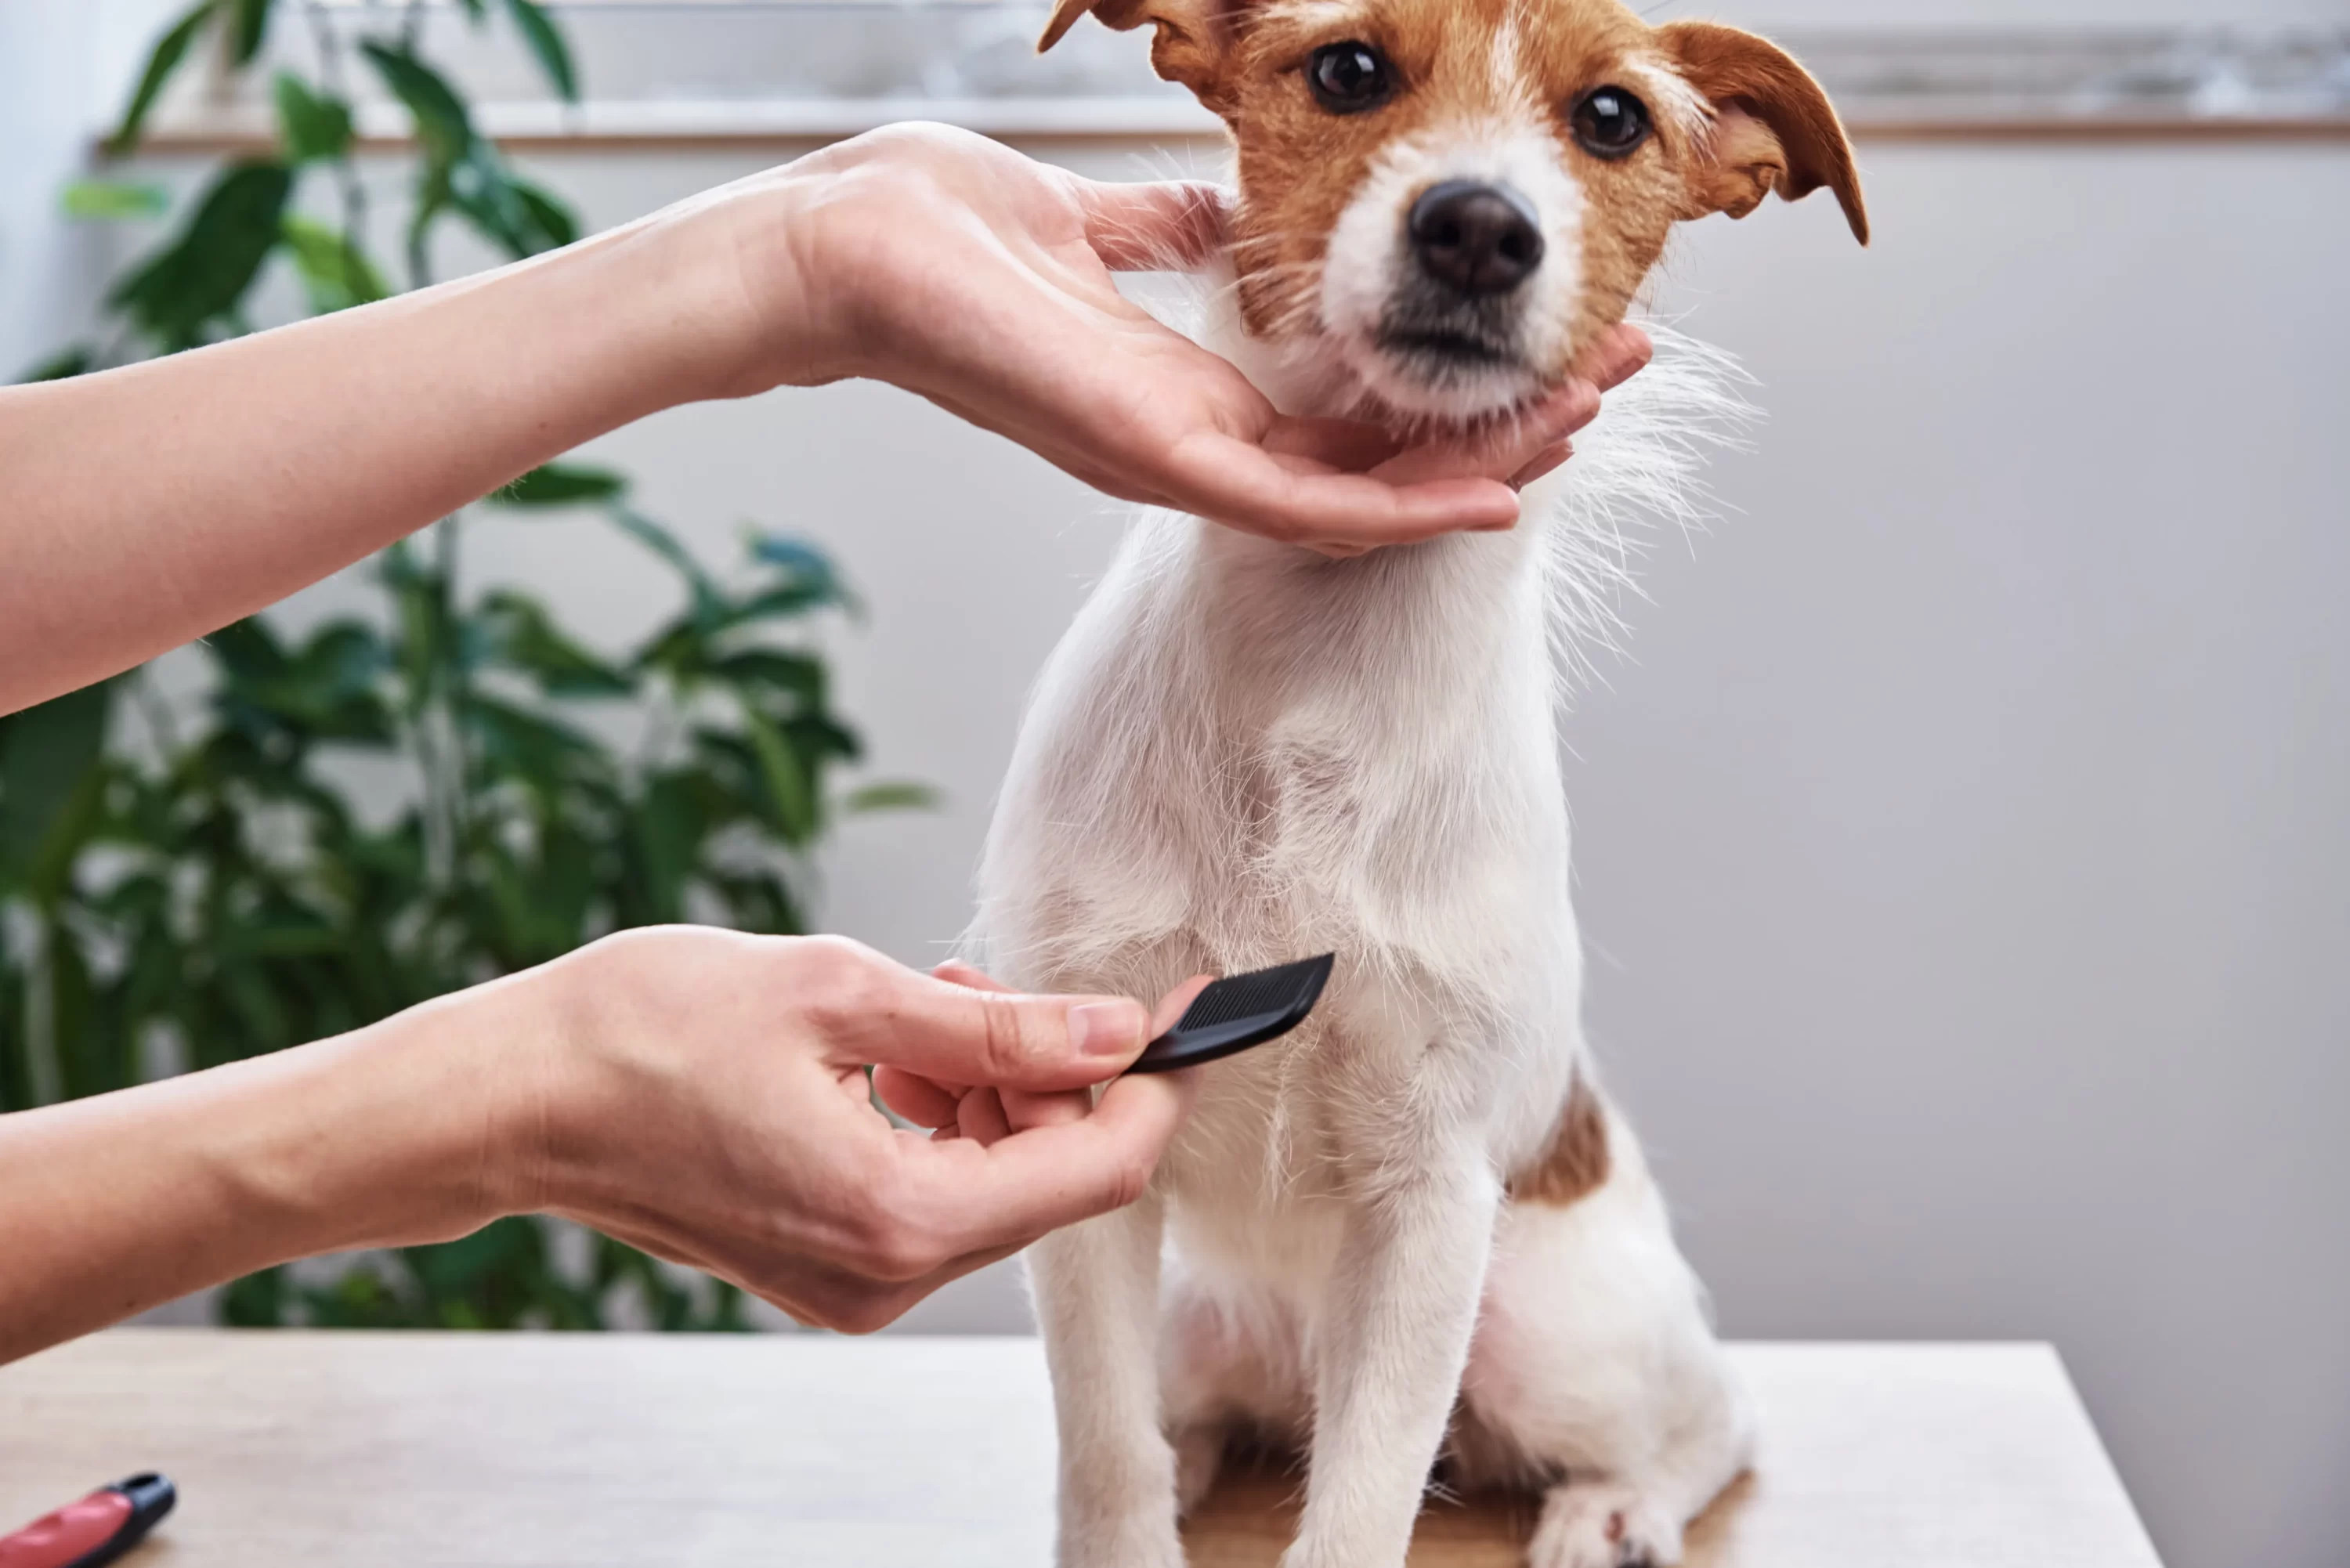 Woman grooming dog. Choosing the right pet sitter